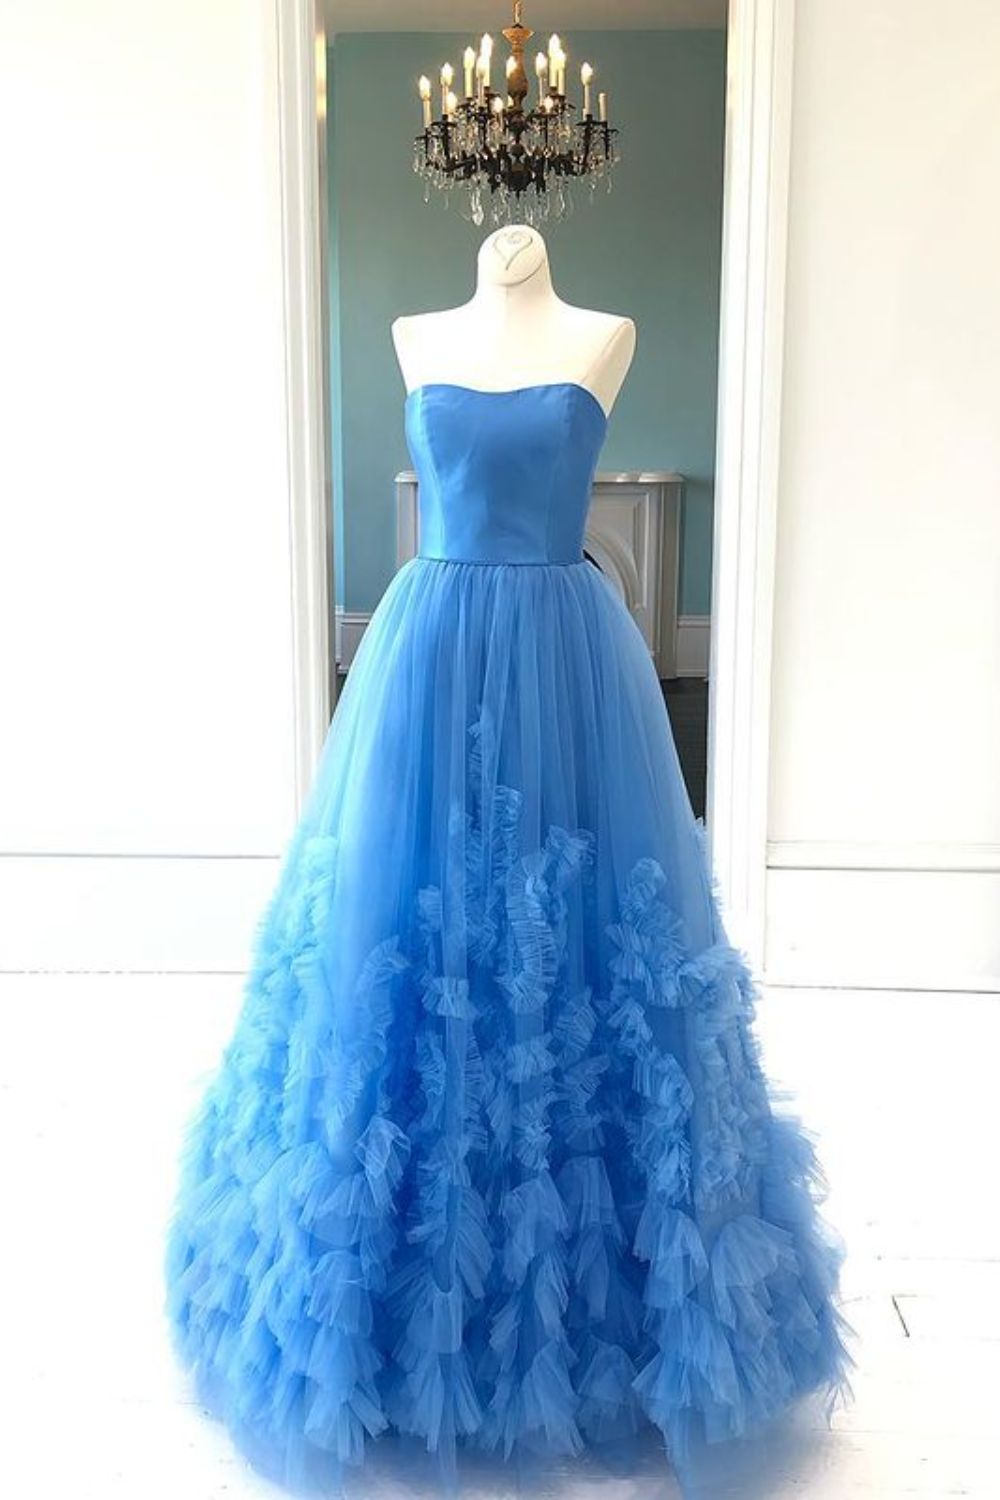 Dressime A Line Strapless Satin & Tulle Long Prom Dress With Ruffle